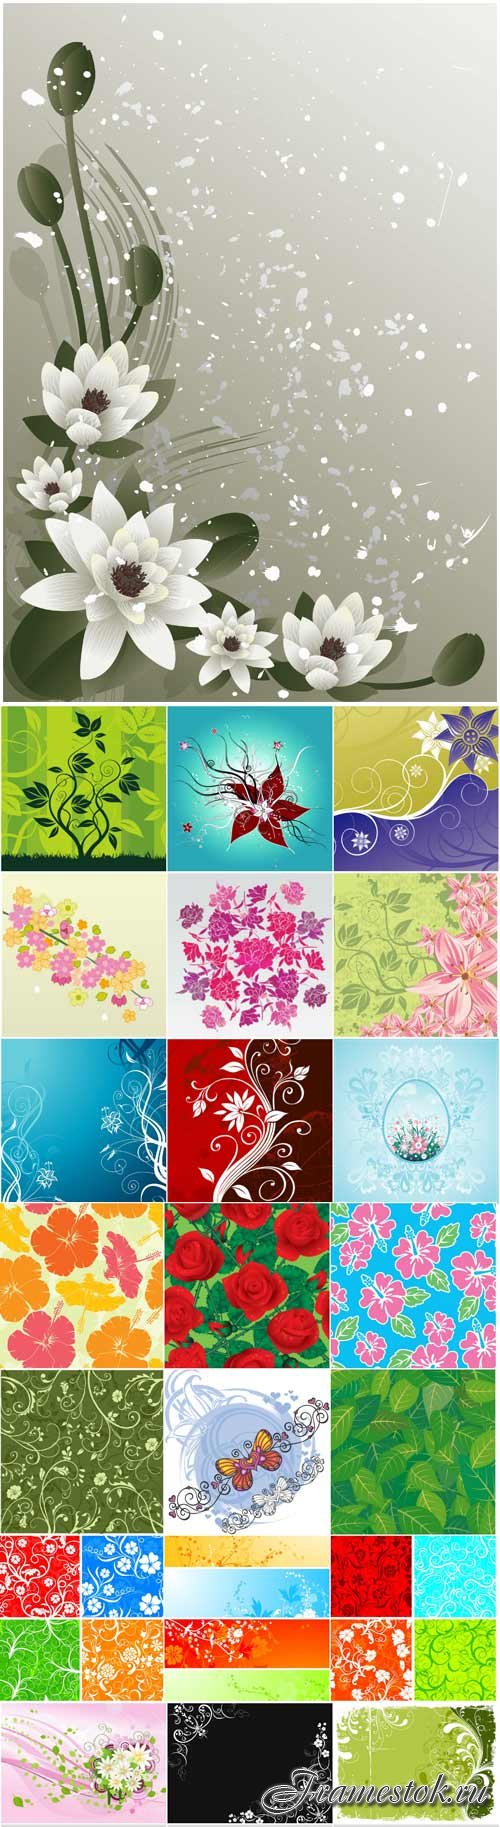 Floral patterns backgrounds stock vector - 5